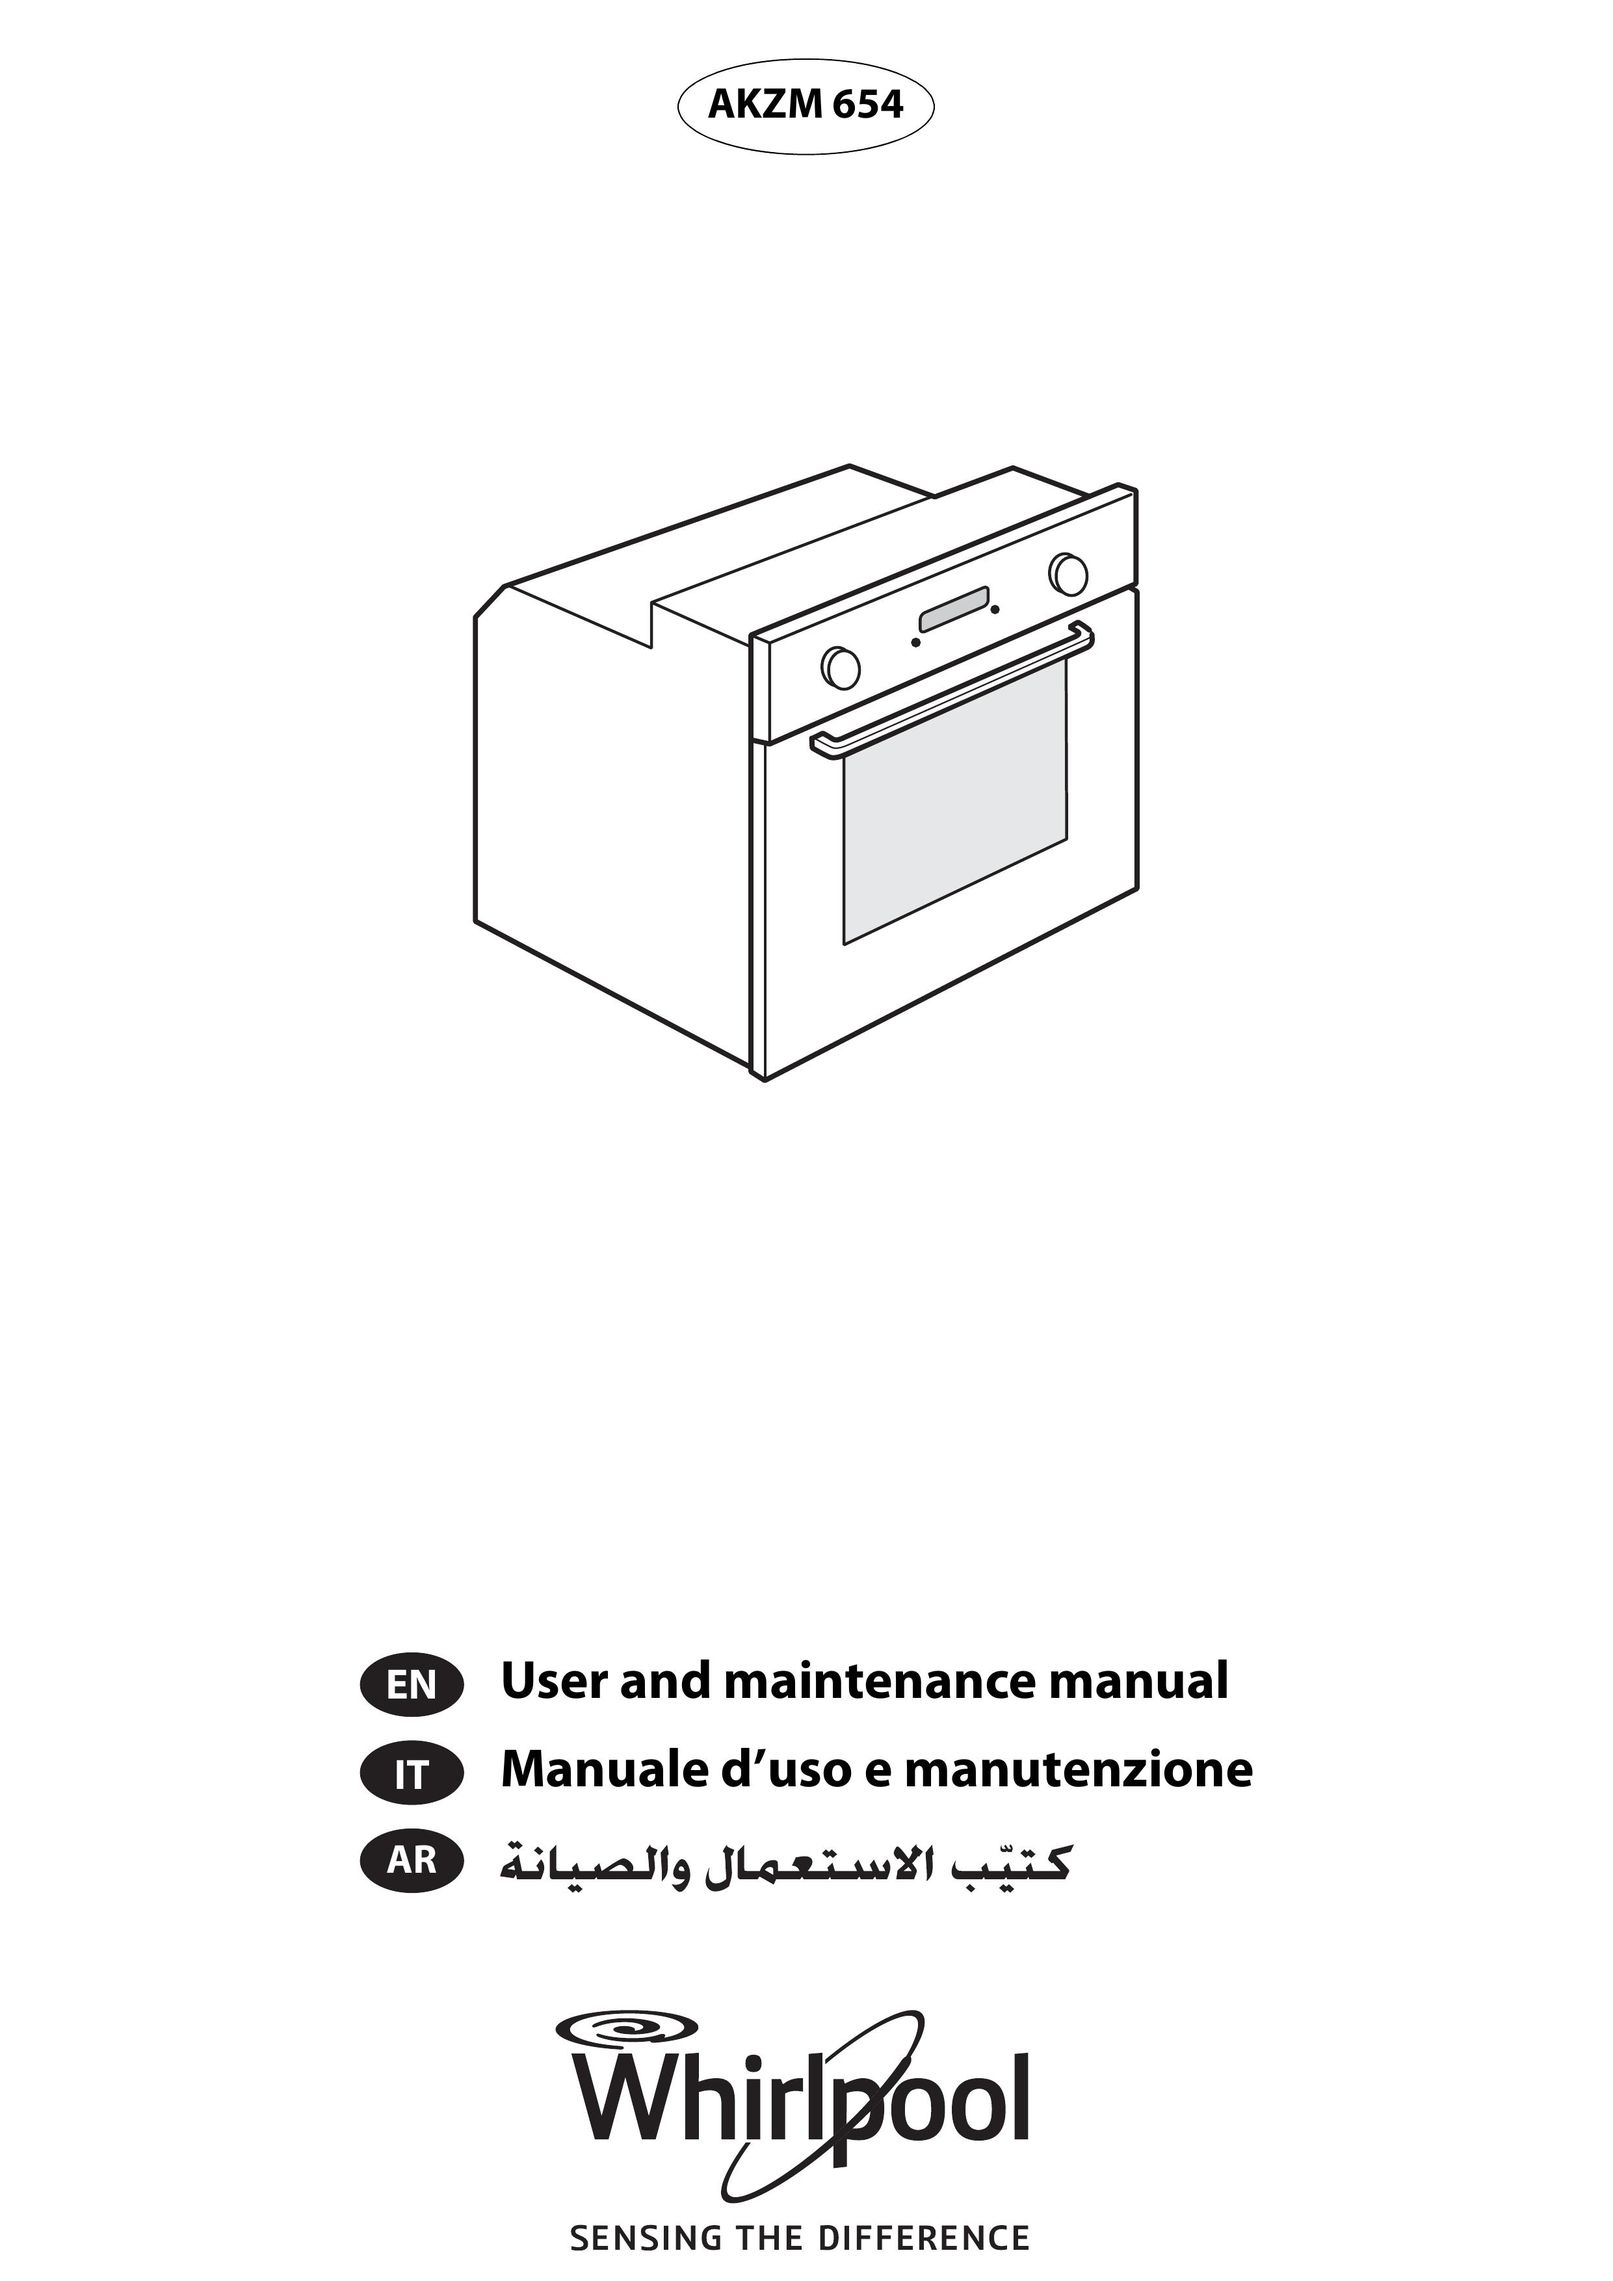 Whirlpool AKZM 654 Double Oven User Manual